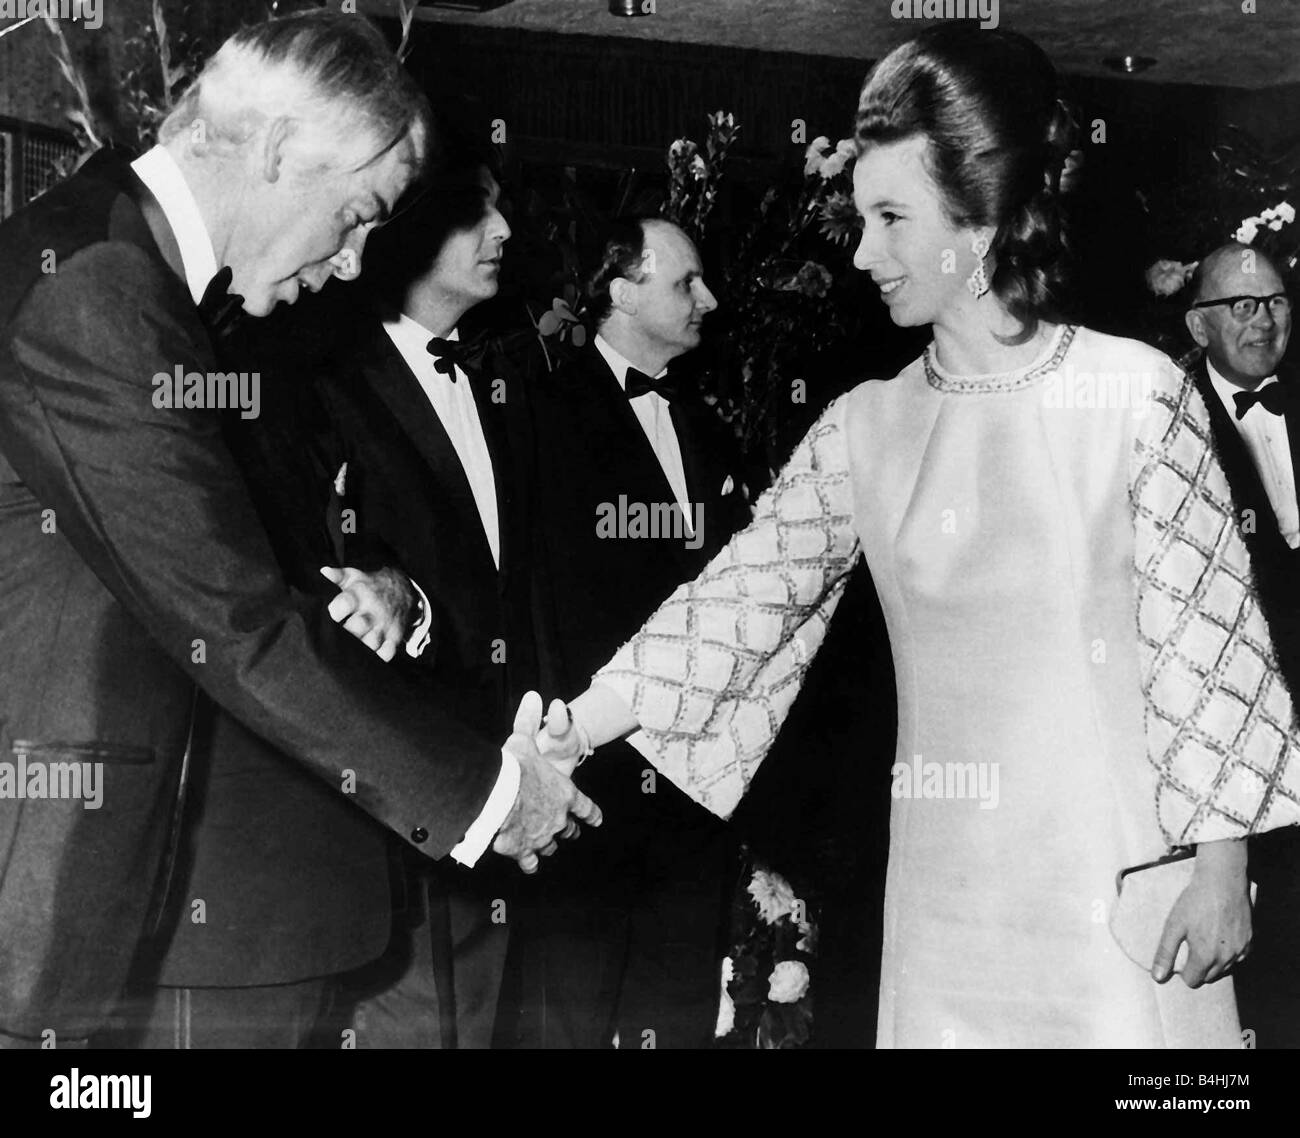 lee-marvin-actor-shakes-hands-with-princess-anne-1969-B4HJ7M.jpg